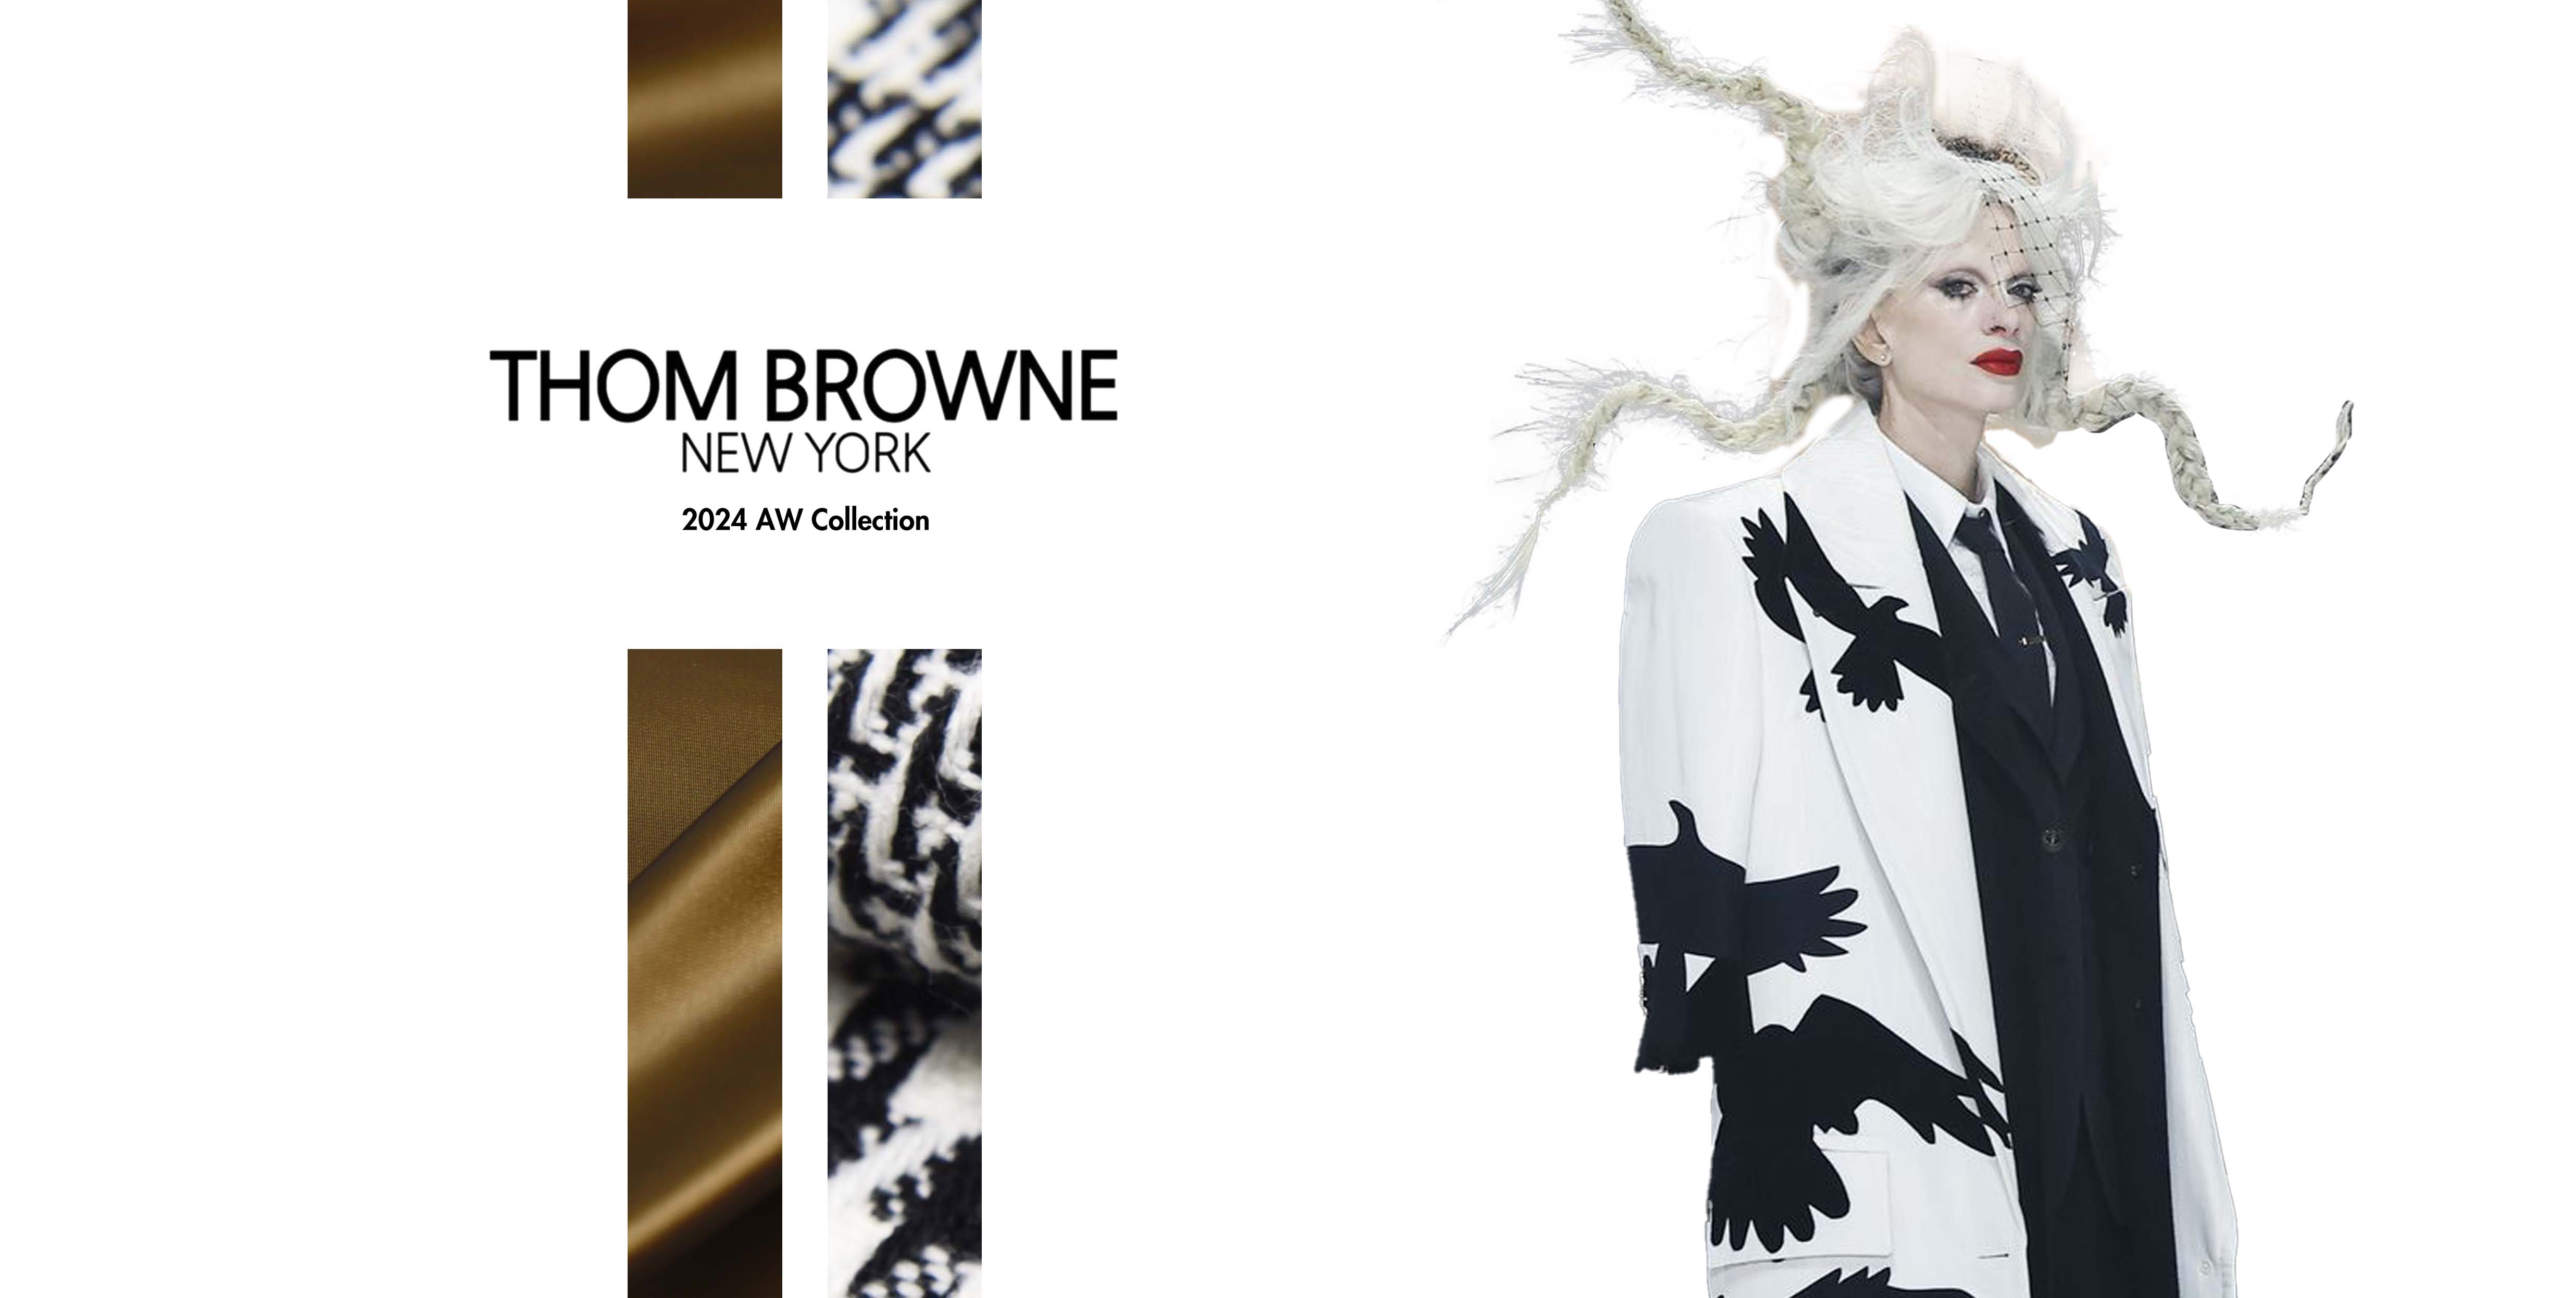 Raven’s Elegance: A Tribute to Thom Browne’s Fall/Winter 2024 Showcase™